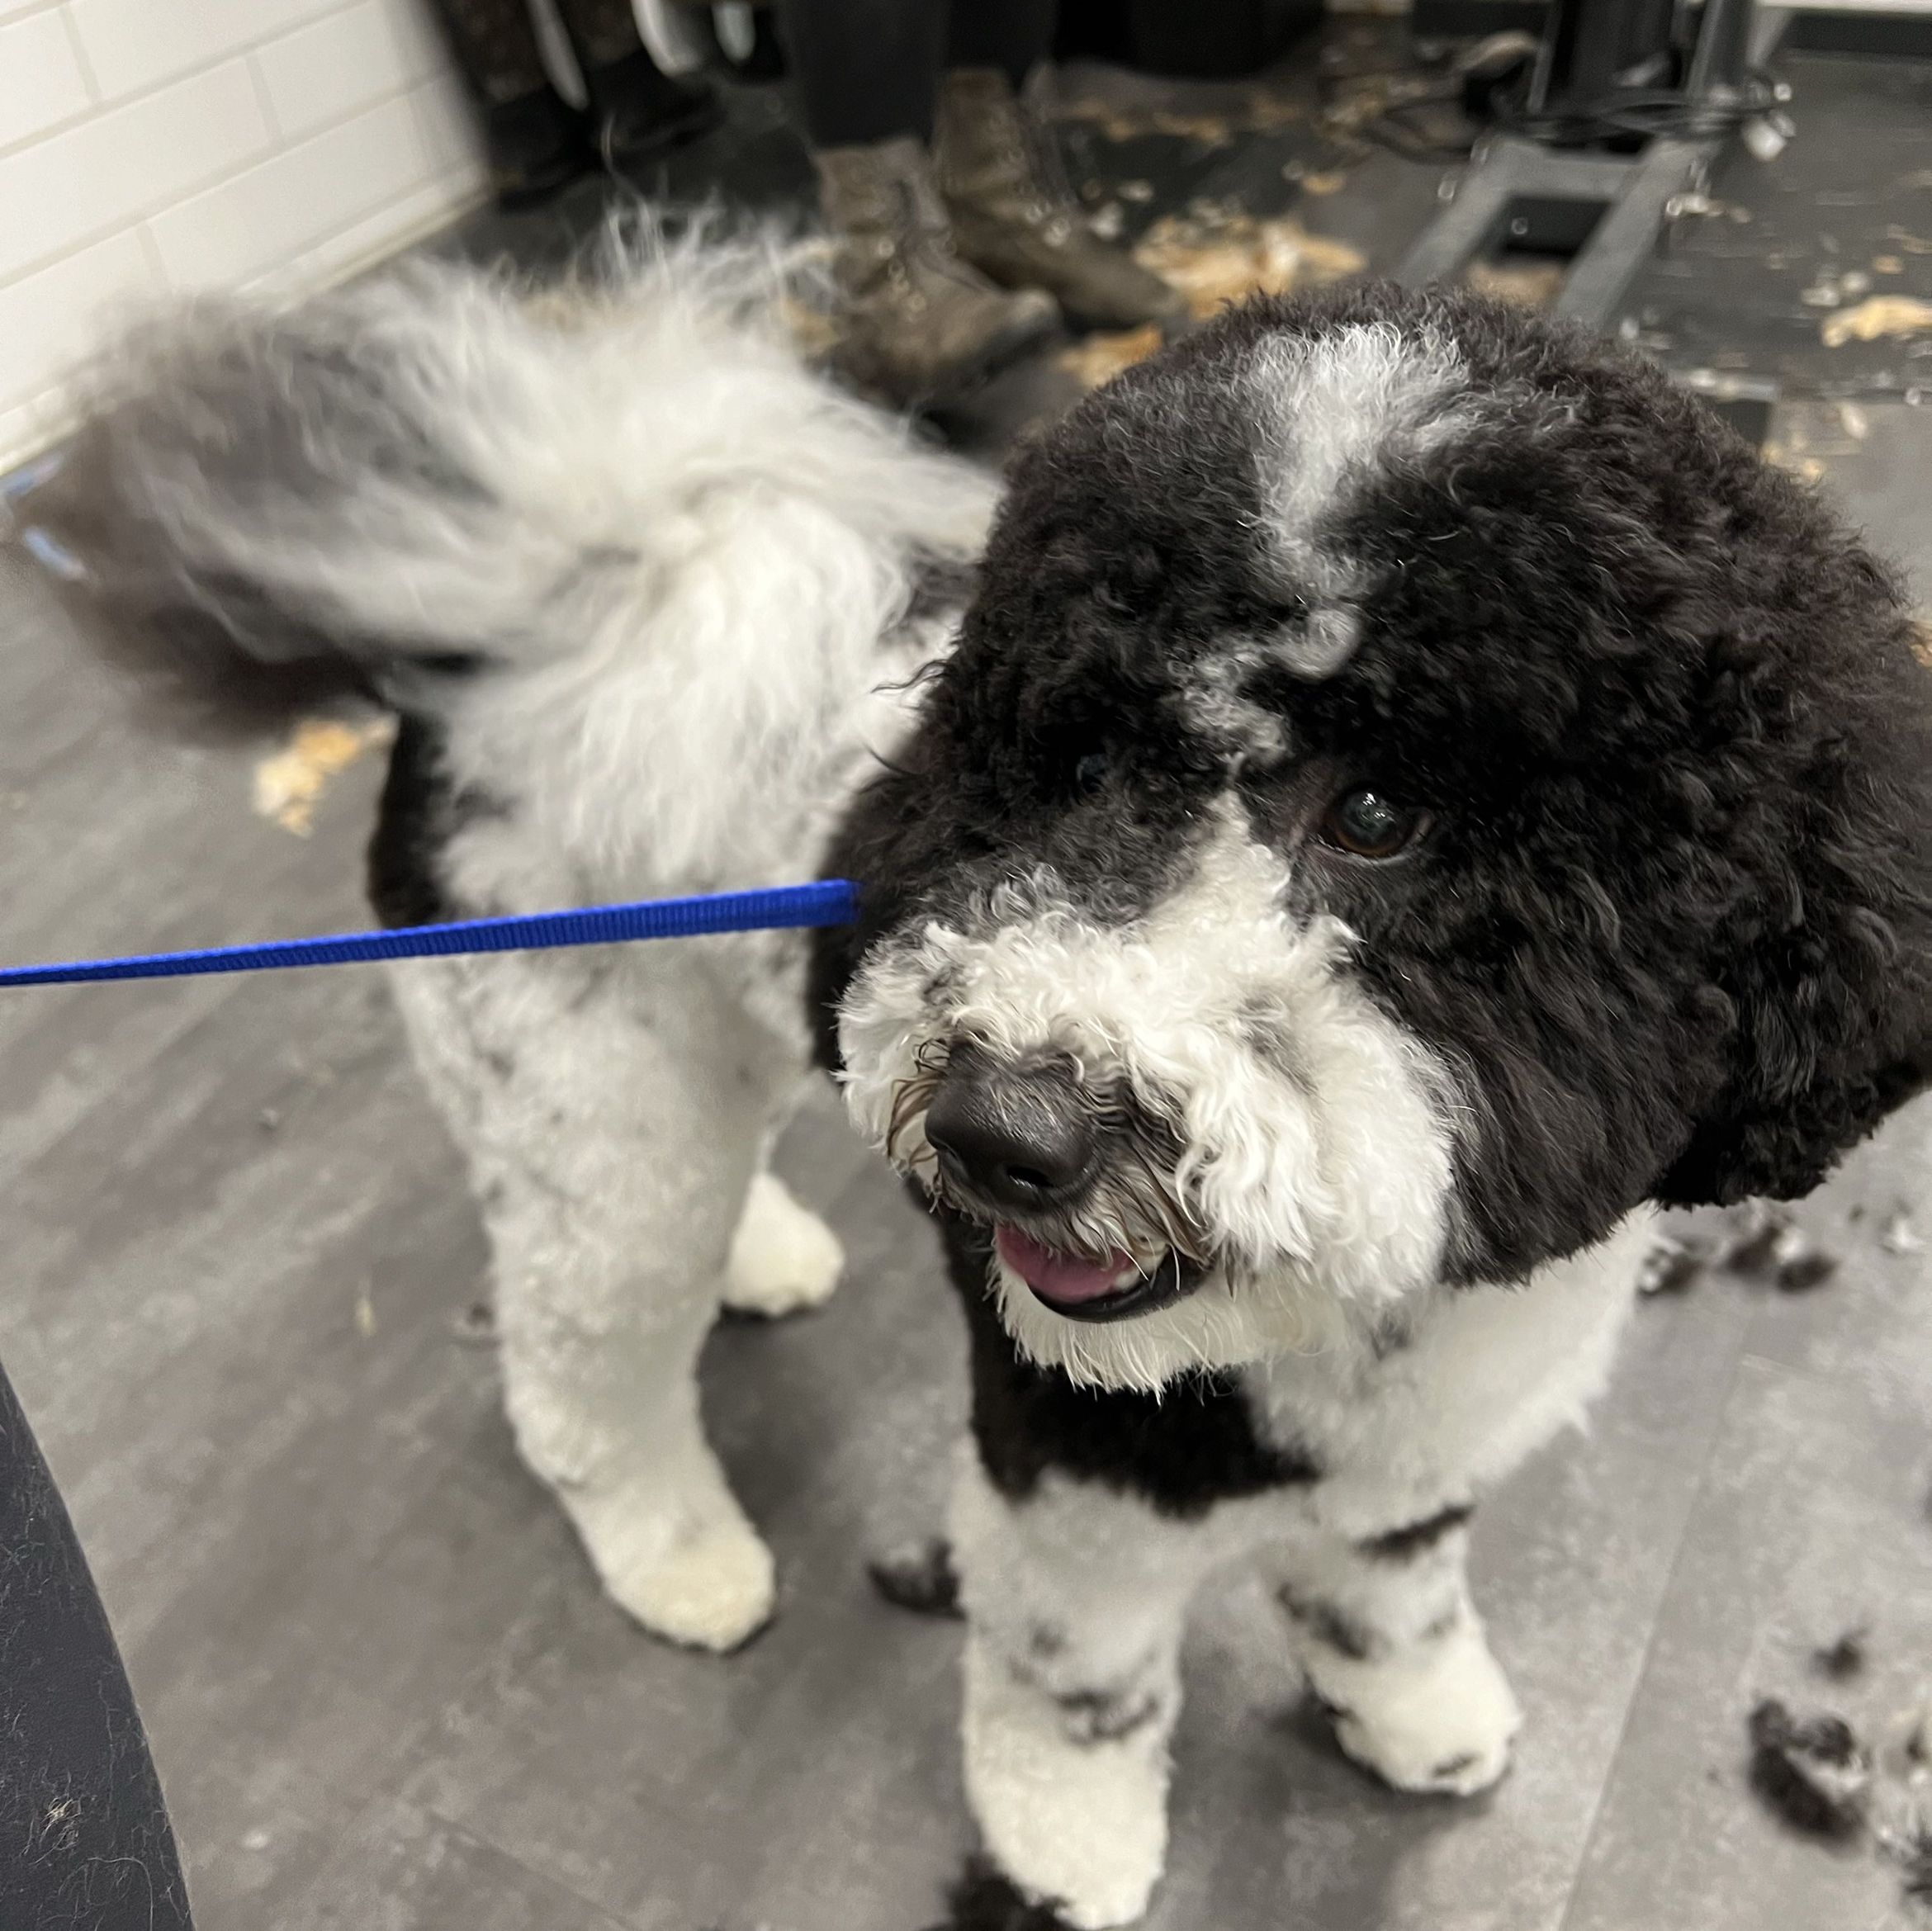 Bad and Boujee Dog Grooming, 1309 130th Ave NE, Minneapolis, 55434